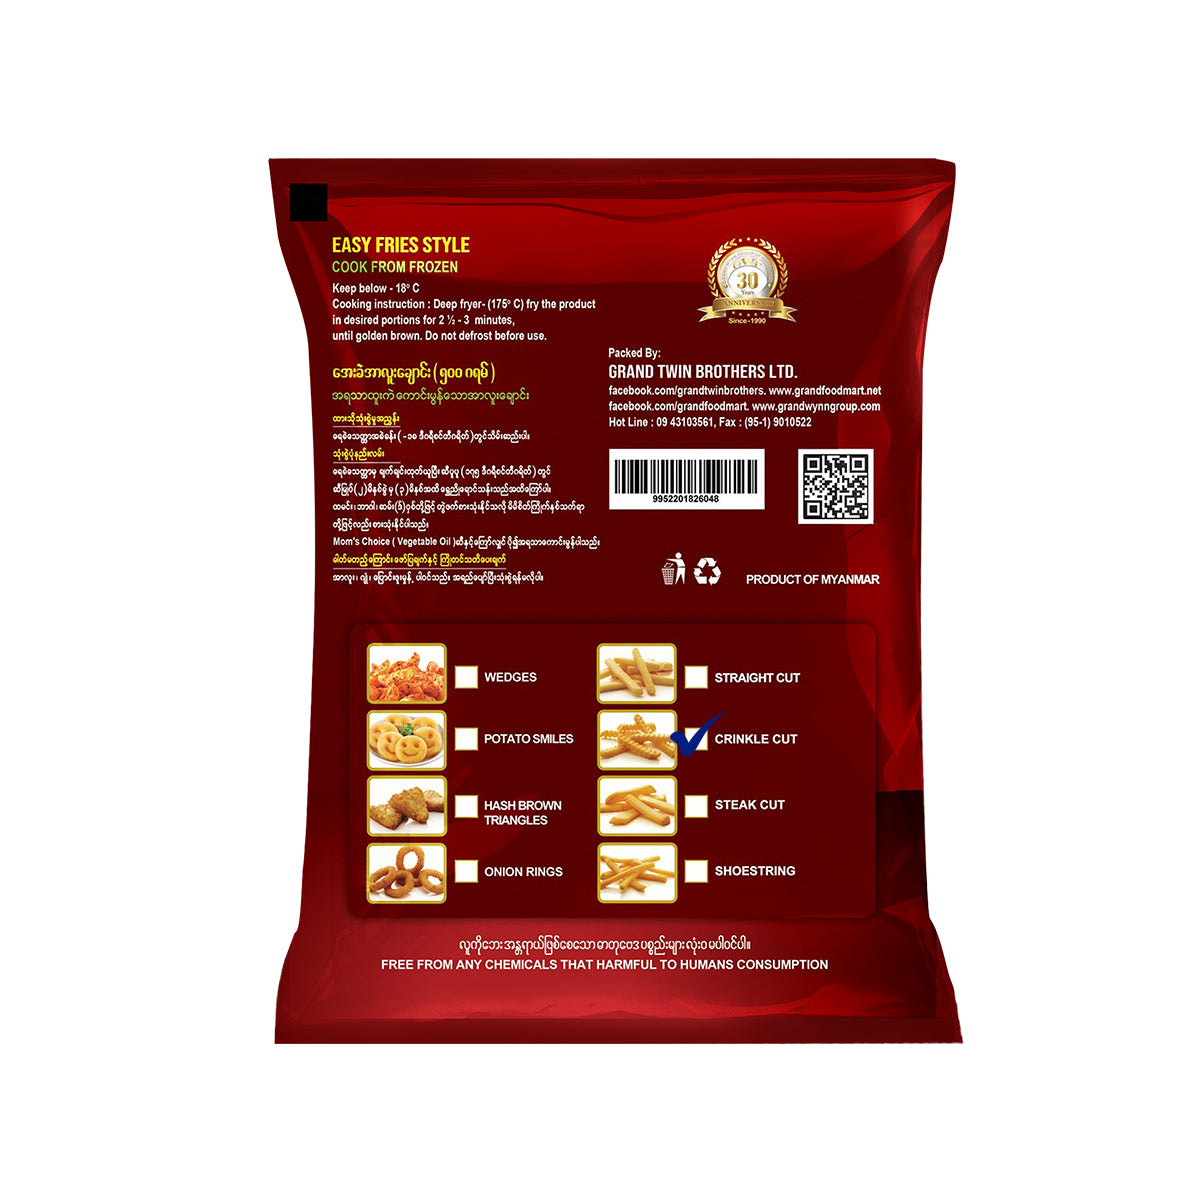 Mom's Choice US Potato Crinkle Cut 500g In-house Brand